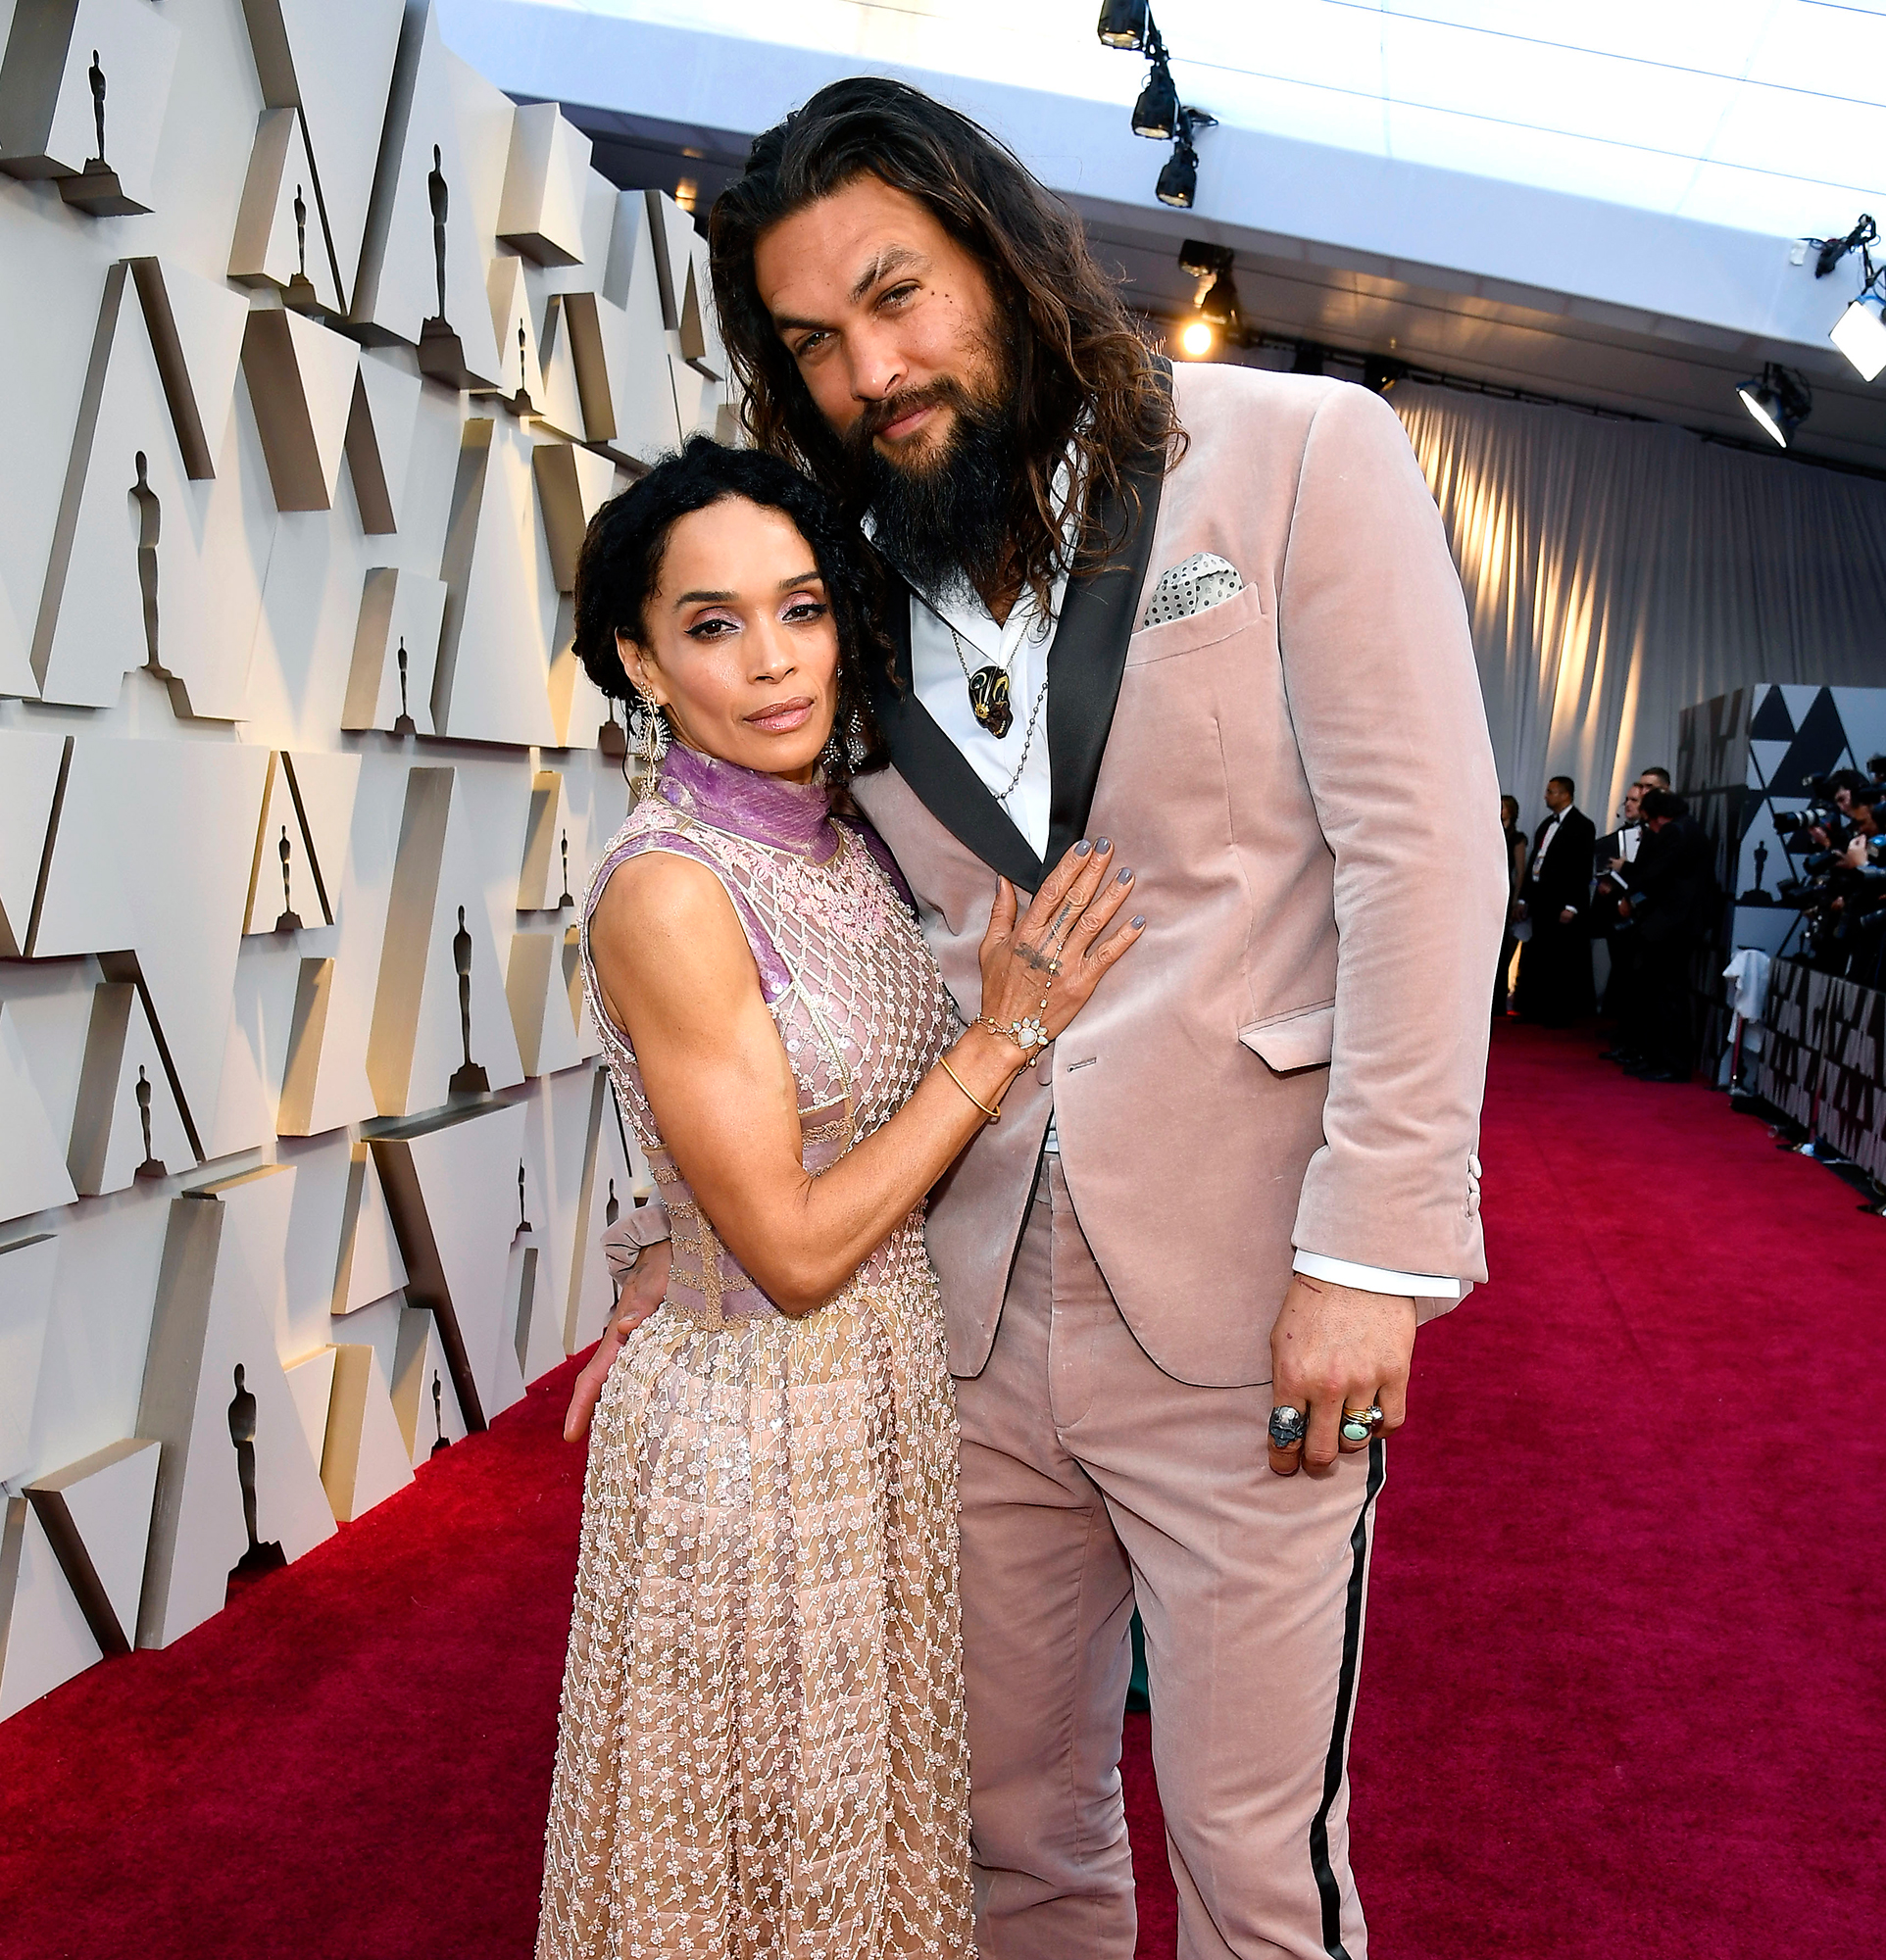   While Jason Momoa looks absolutely KILLER in his blush, velvet suit and matching scrunchie…LOOK AT HIS WIFE. That beaded overlay and lavender silk peeking out is an insane combo. I would also kill for her arms, but that’s for a different post ;)  